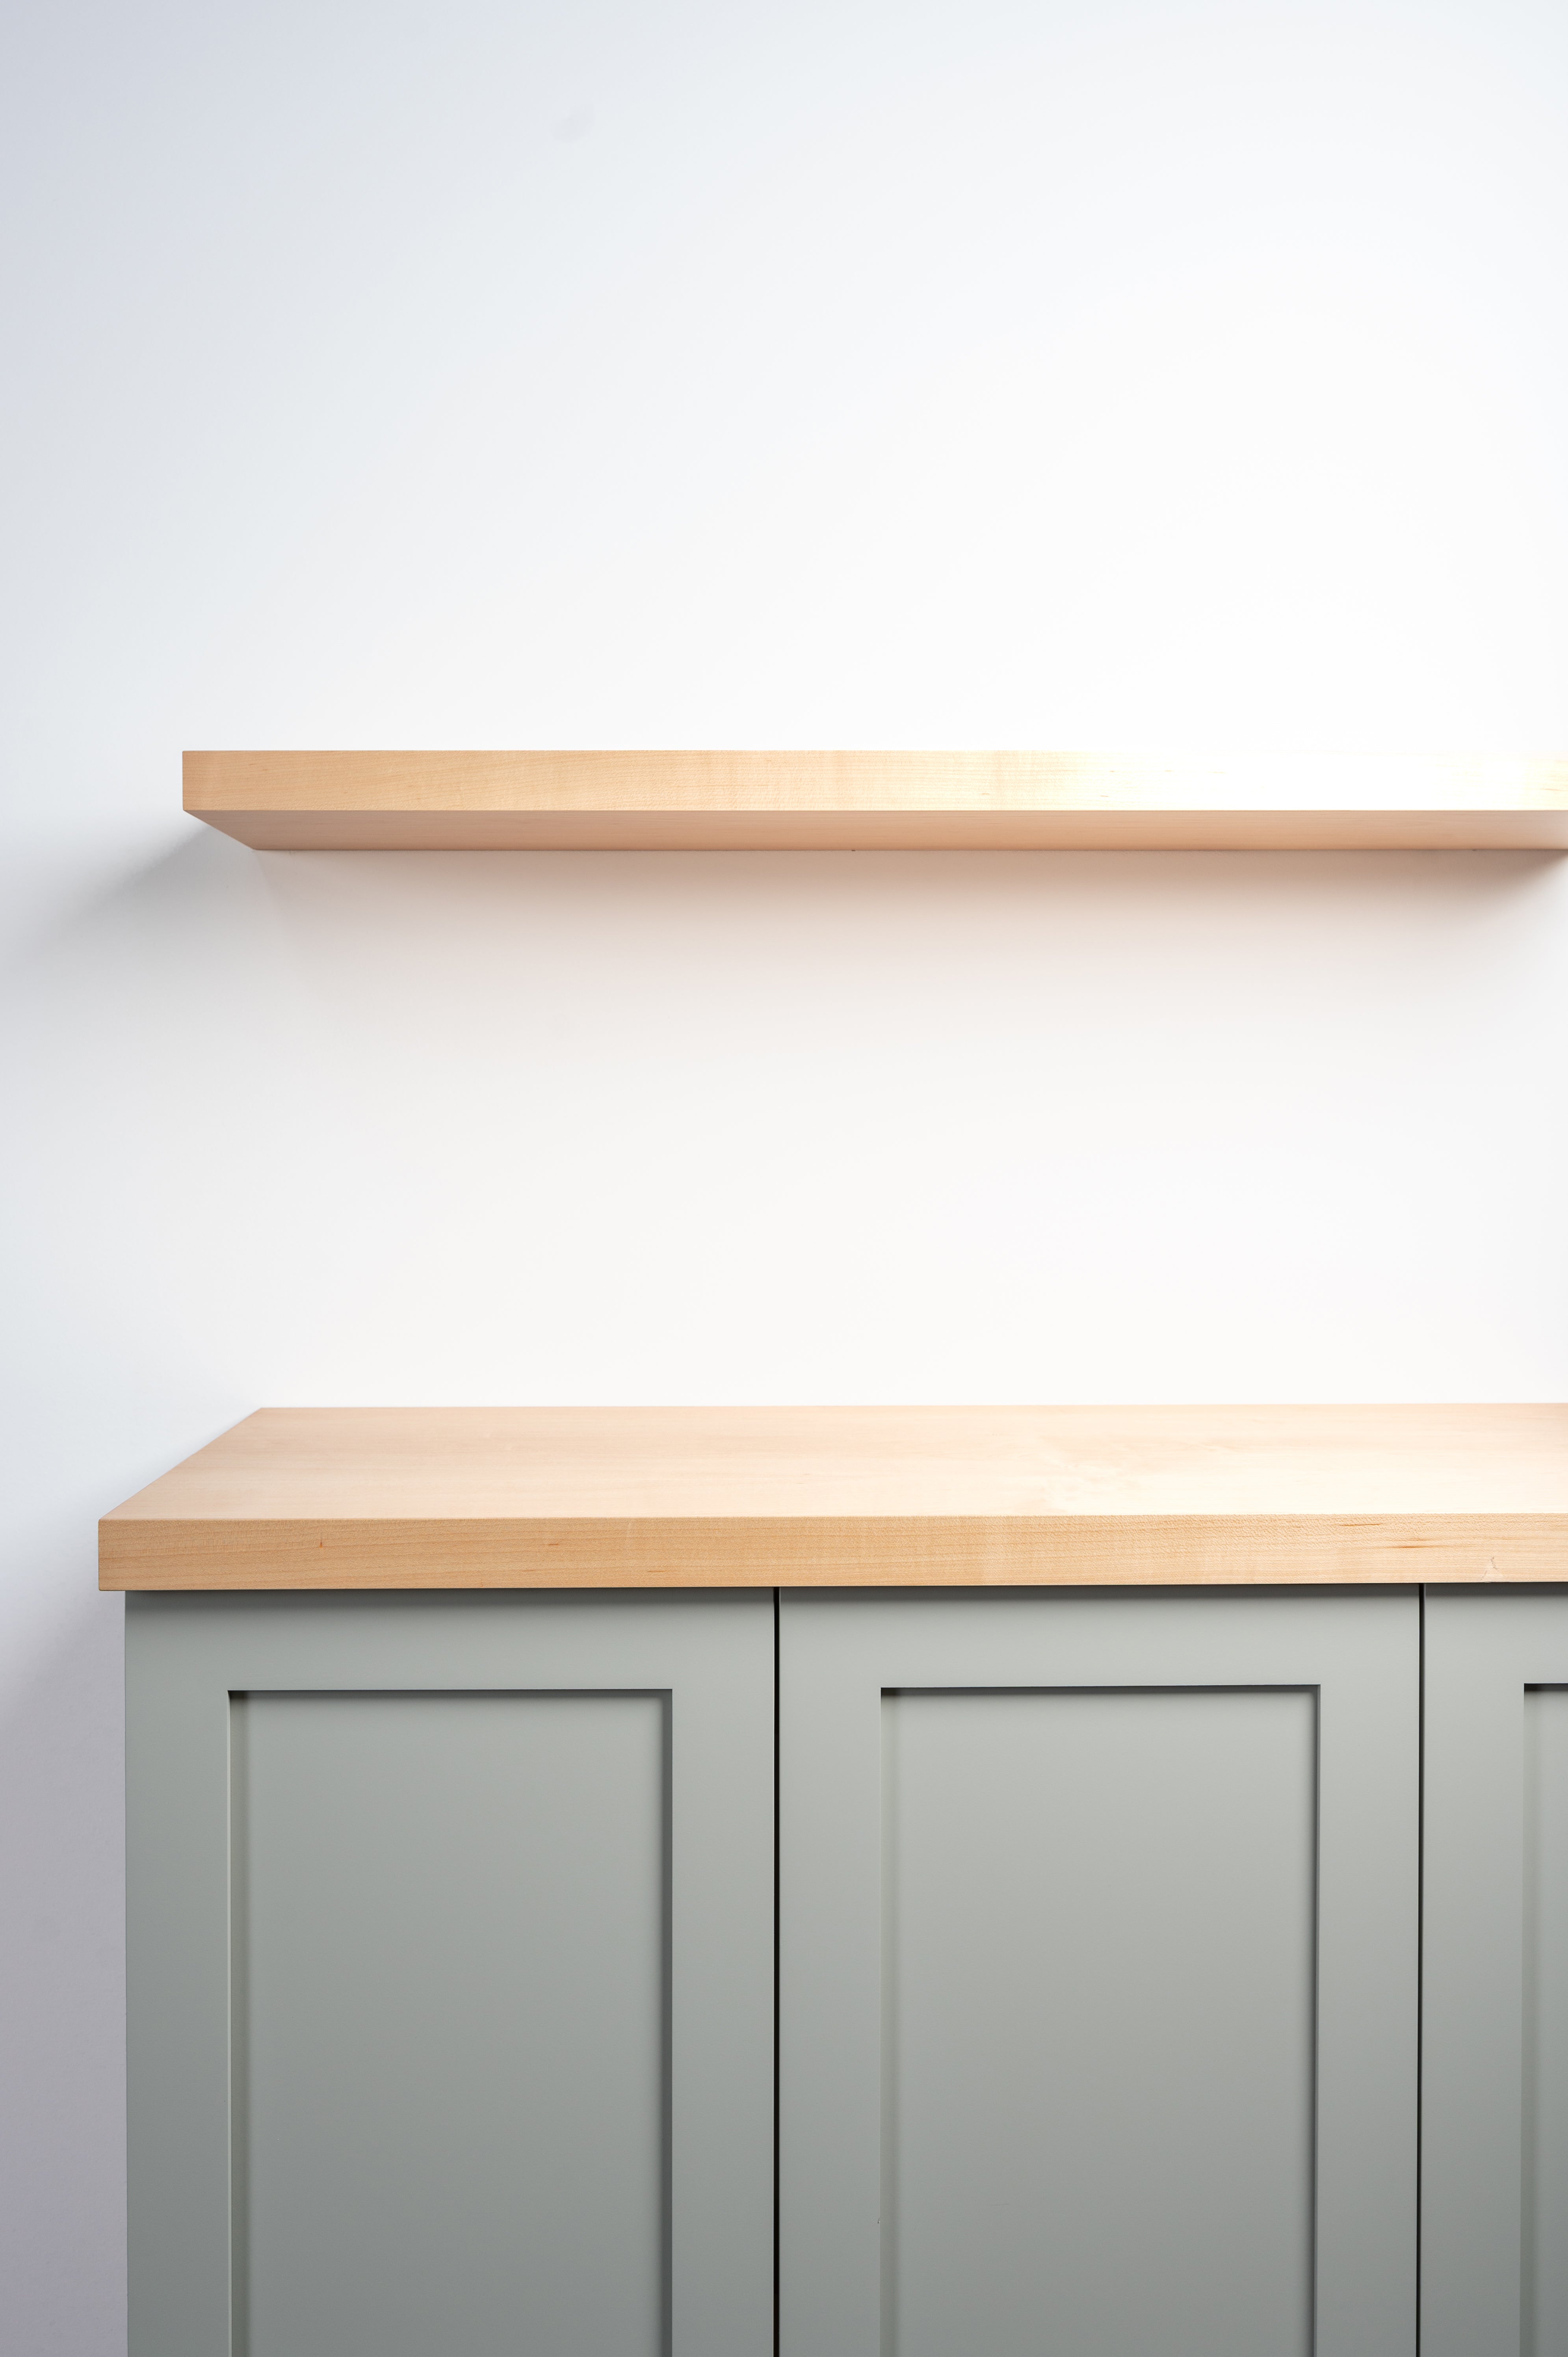 Maple 2-4" thick Cabinet Top / Slab Shelf